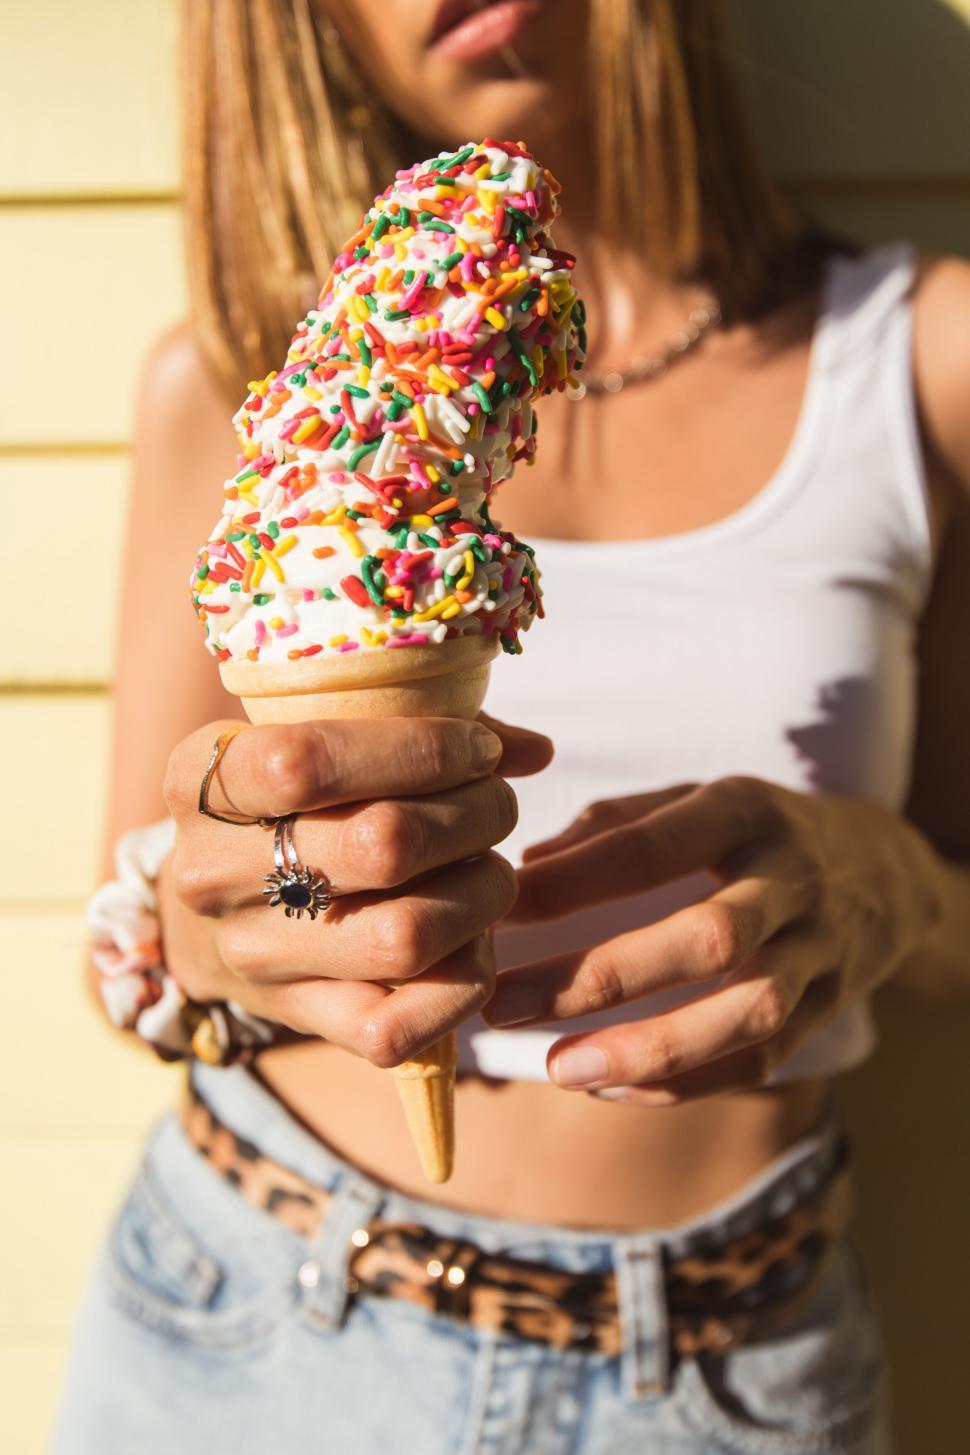 Free Image of Woman holding a sprinkled ice cream cone closeup 